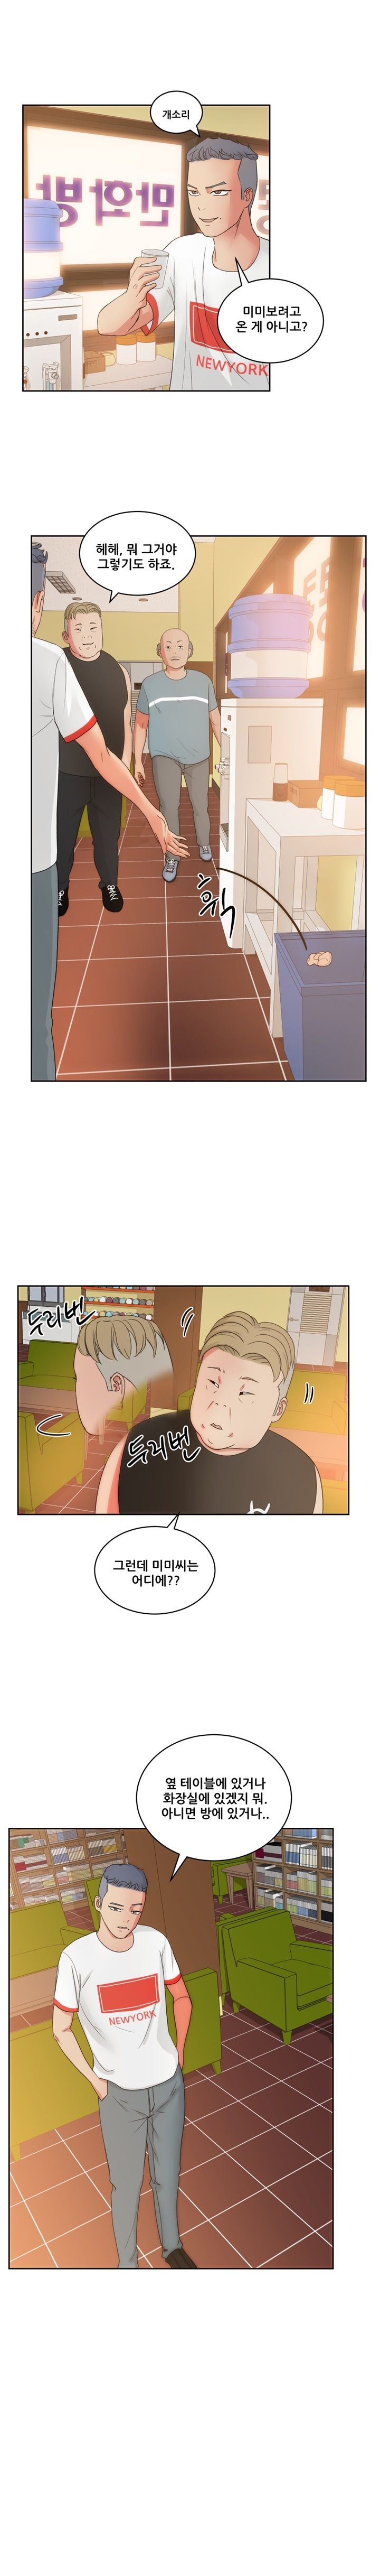 Sooyung Comic Shop Raw - Chapter 19 Page 7